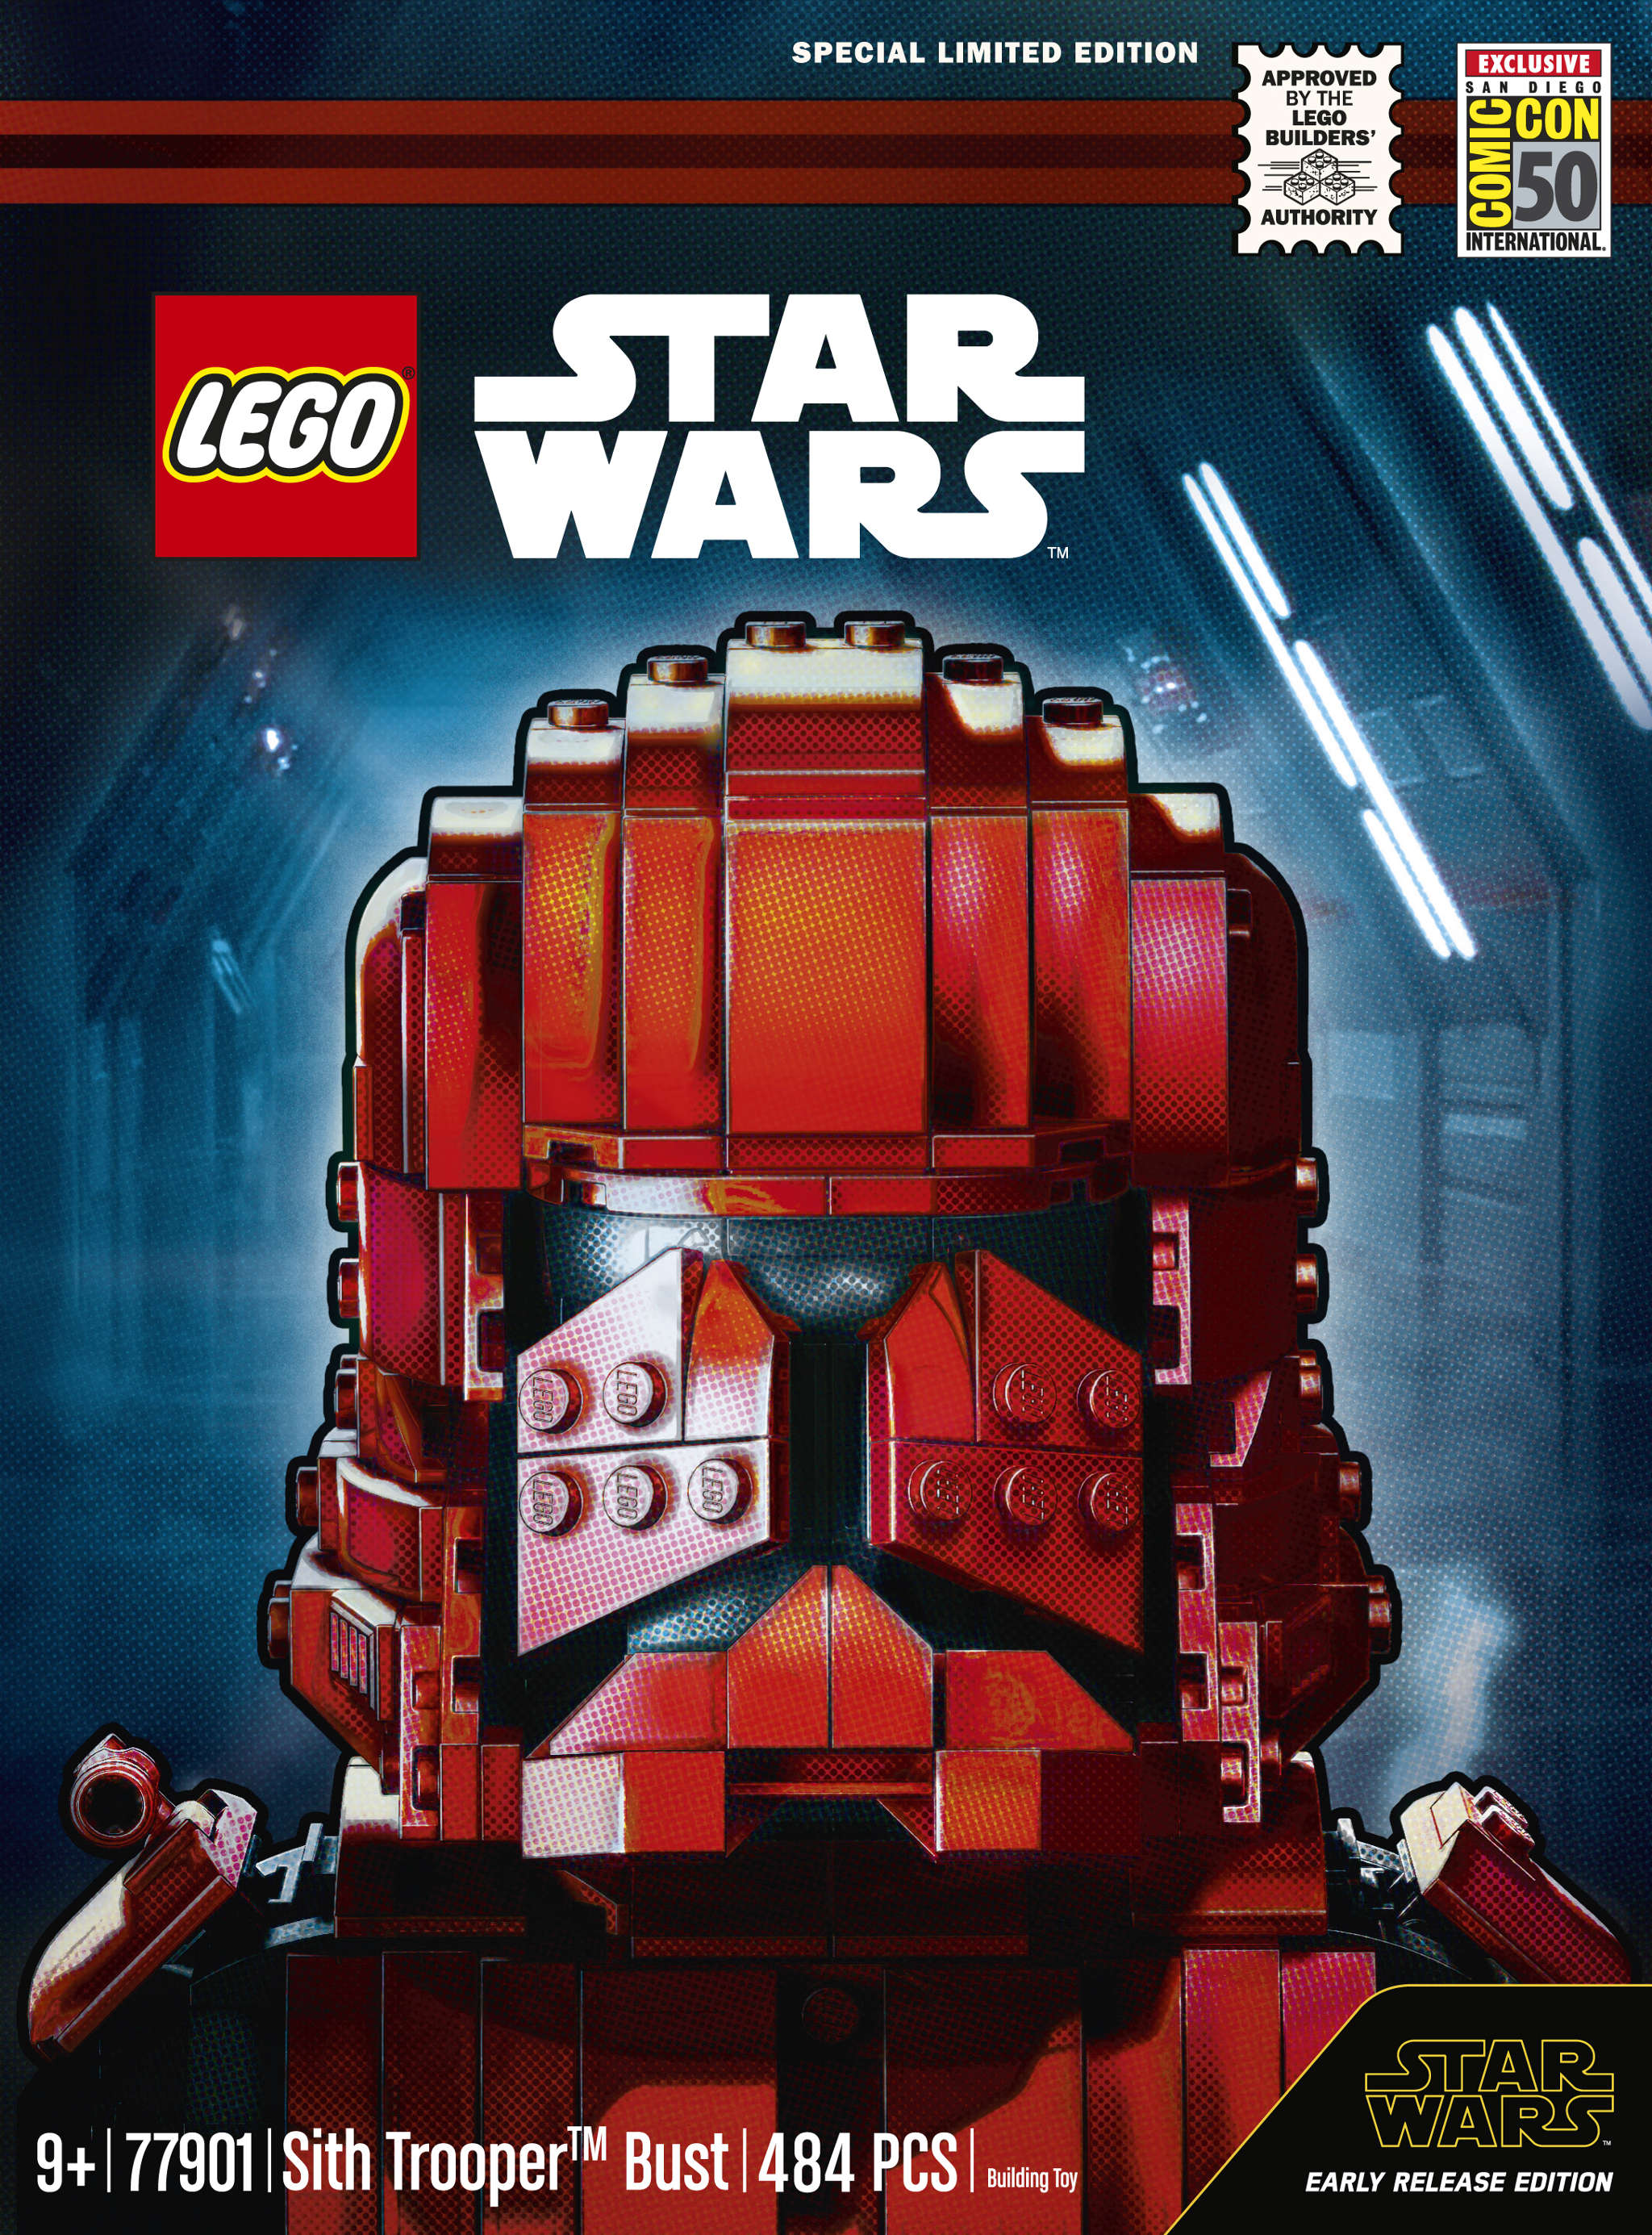 Sith Trooper Bust Is The LEGO Star Wars SDCC Exclusive - FBTB